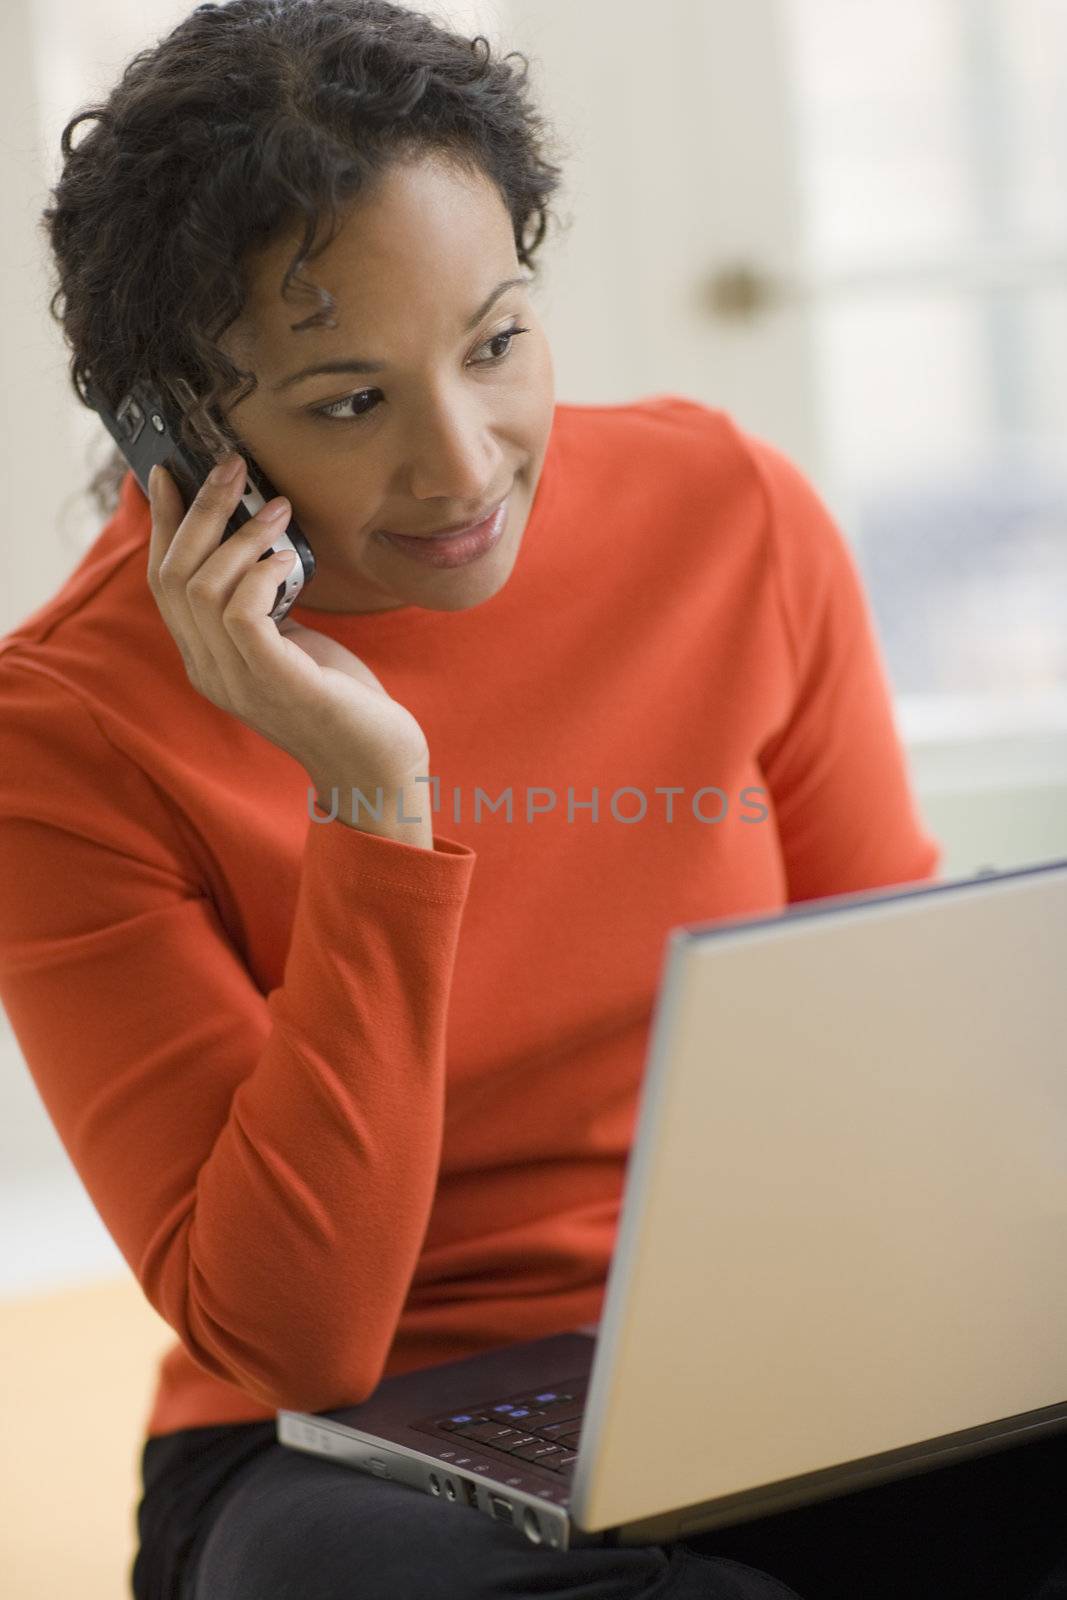 Black woman on cell phone and laptop by edbockstock